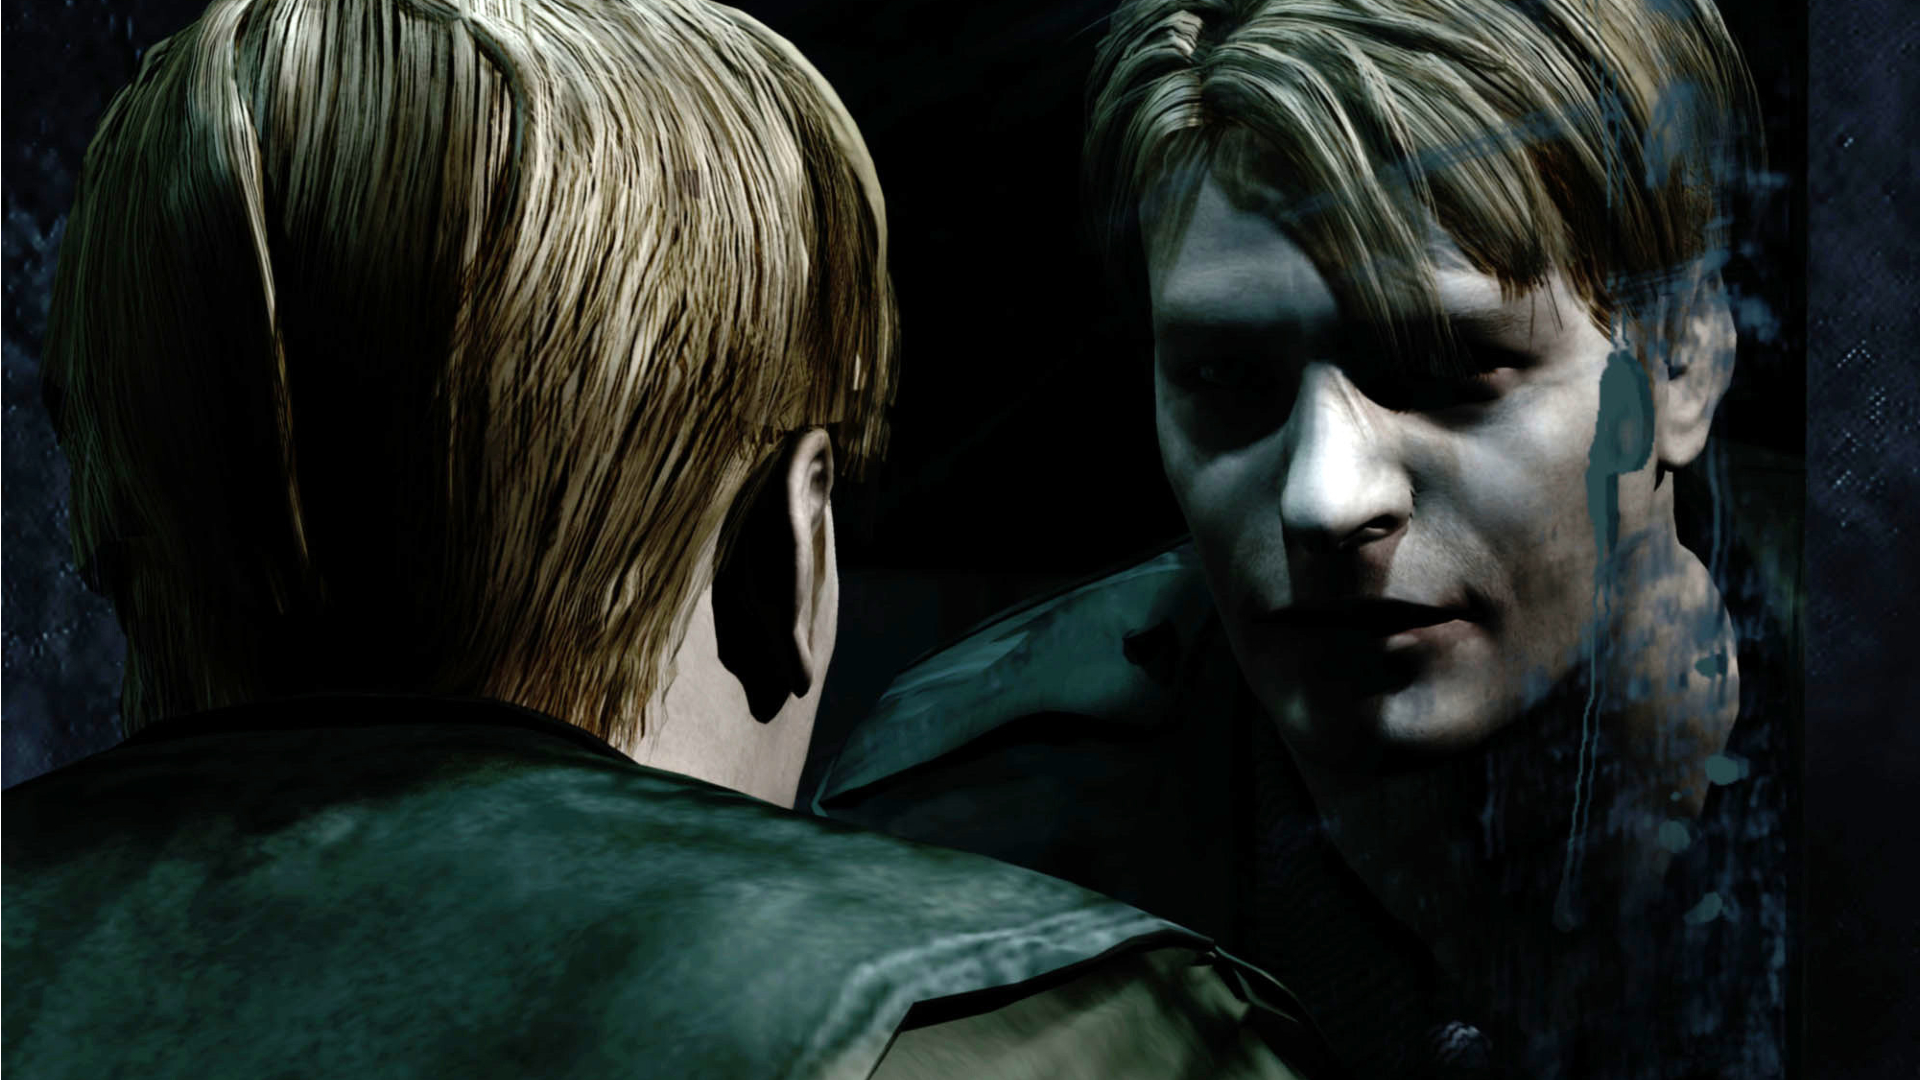 Bloober Team is capable of a good Silent Hill 2 remake – but do we need one?